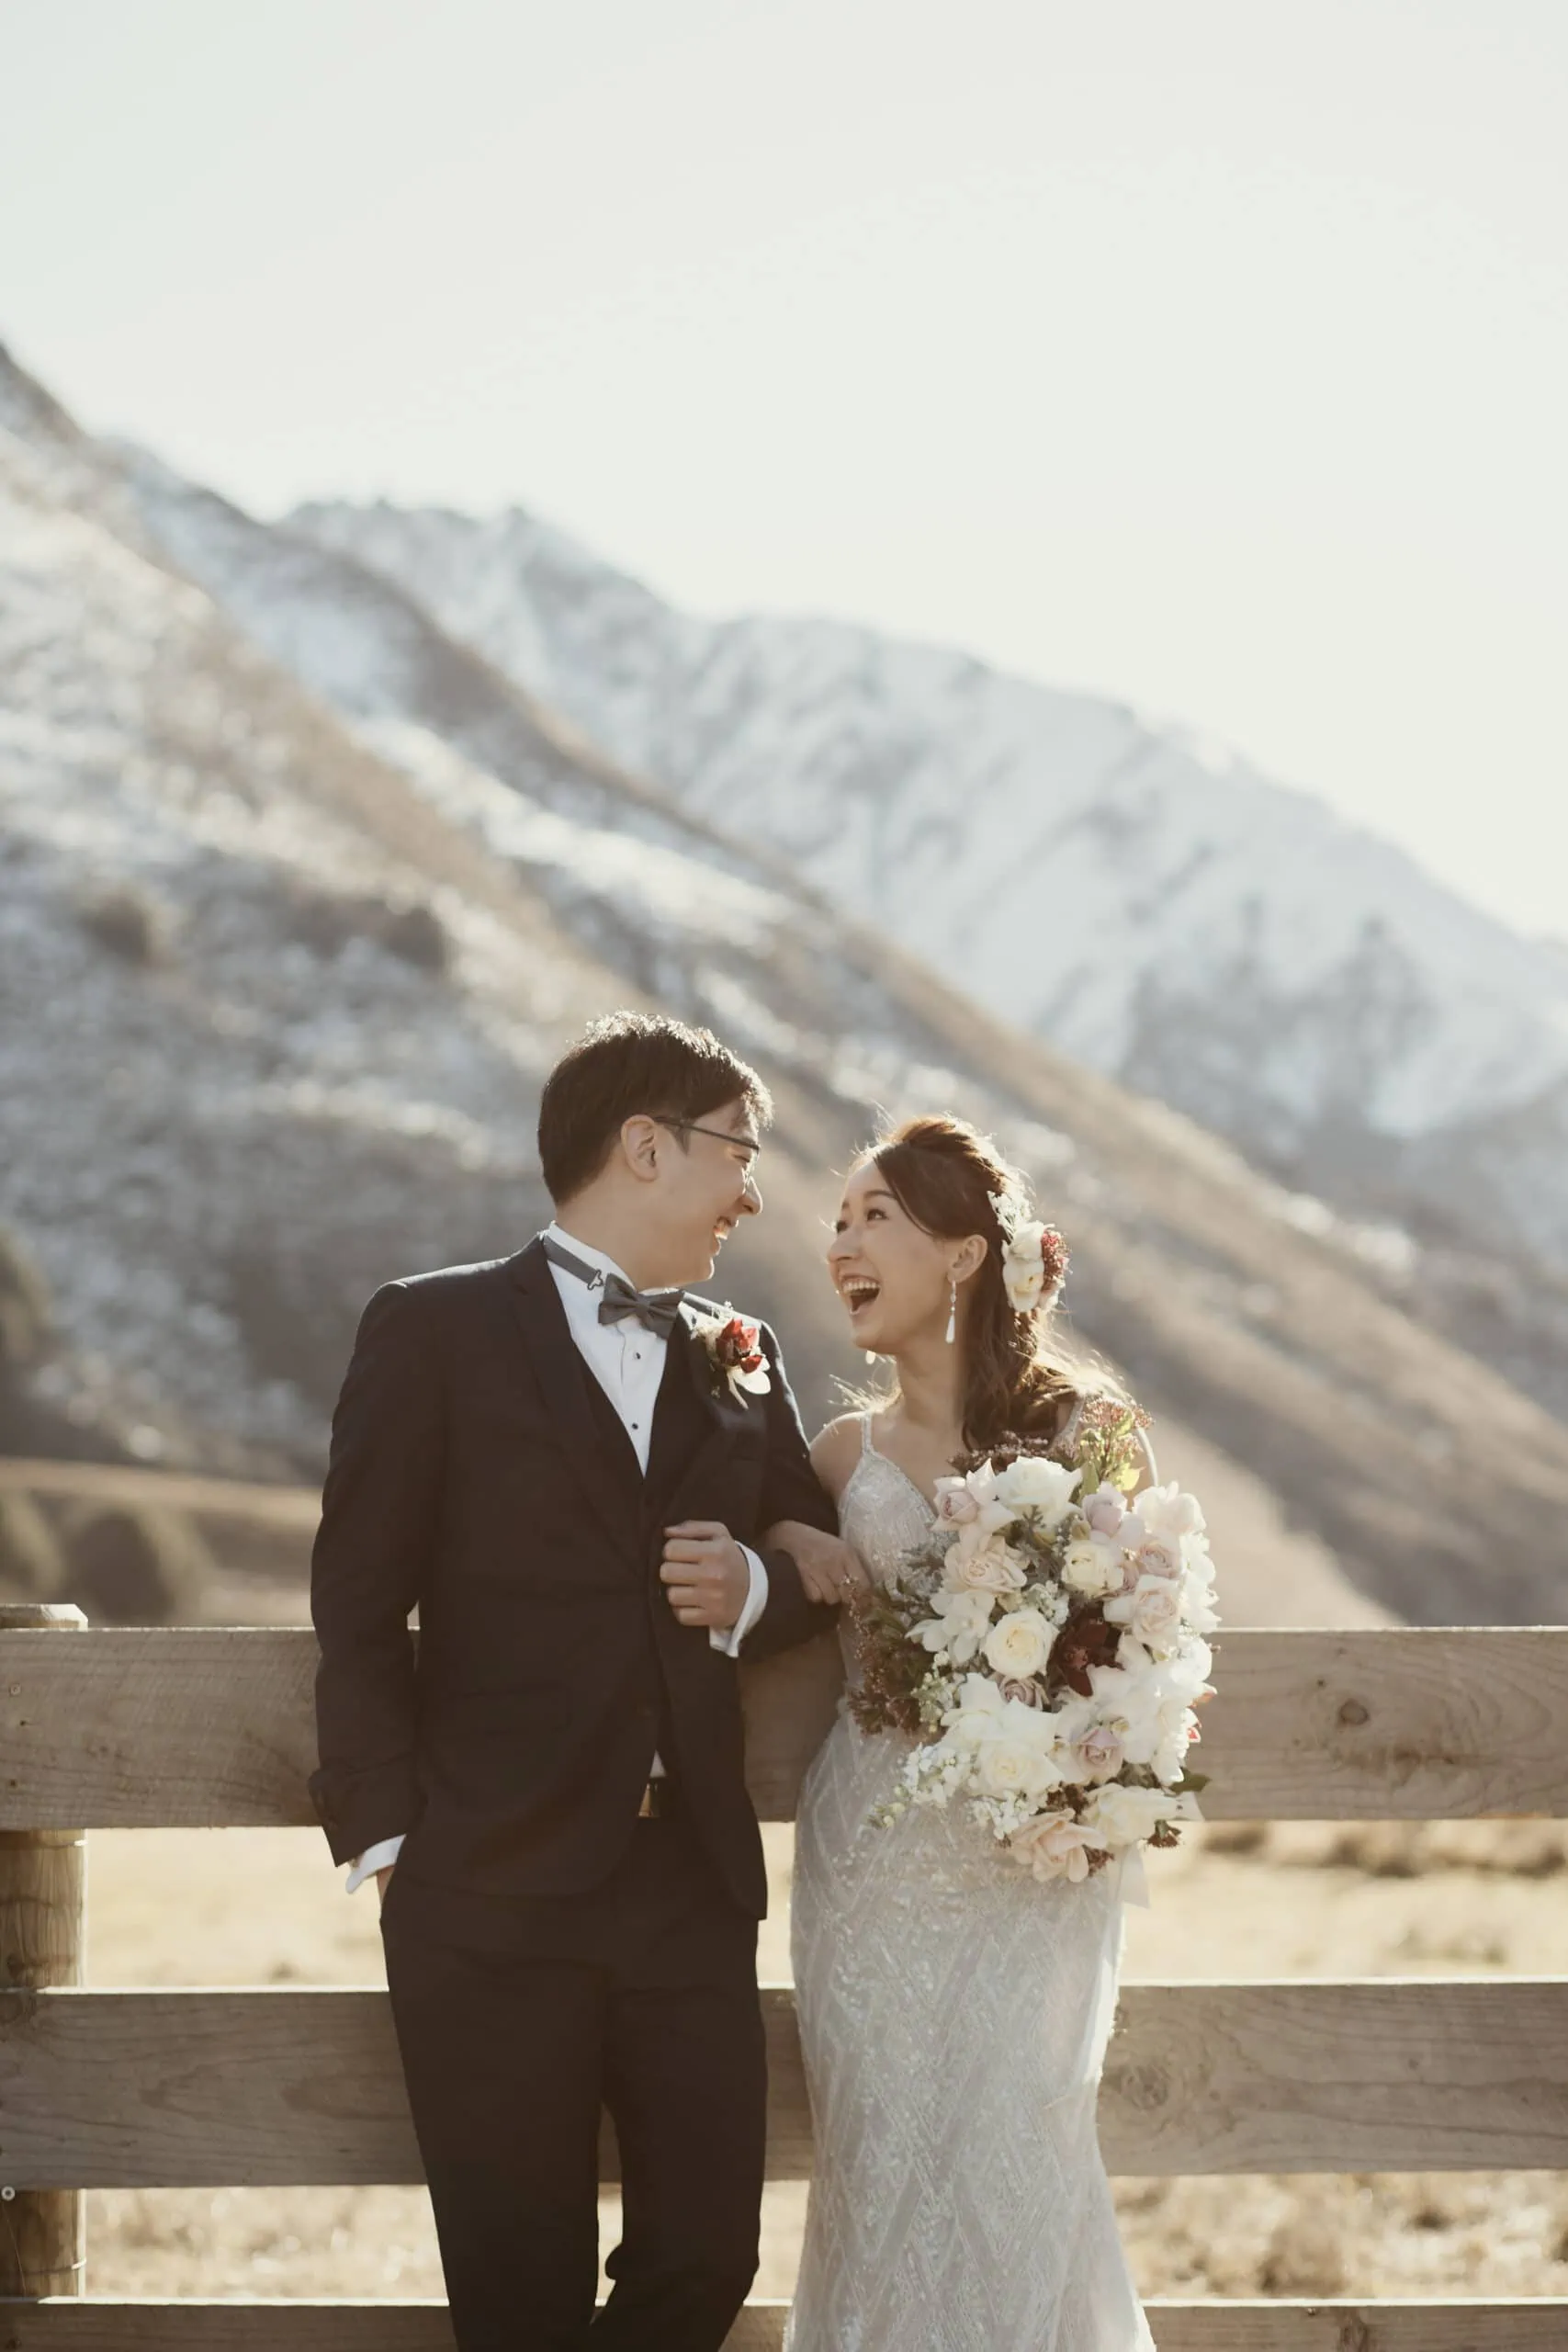 A couple eloping at The Remarkables with mountains in the background.